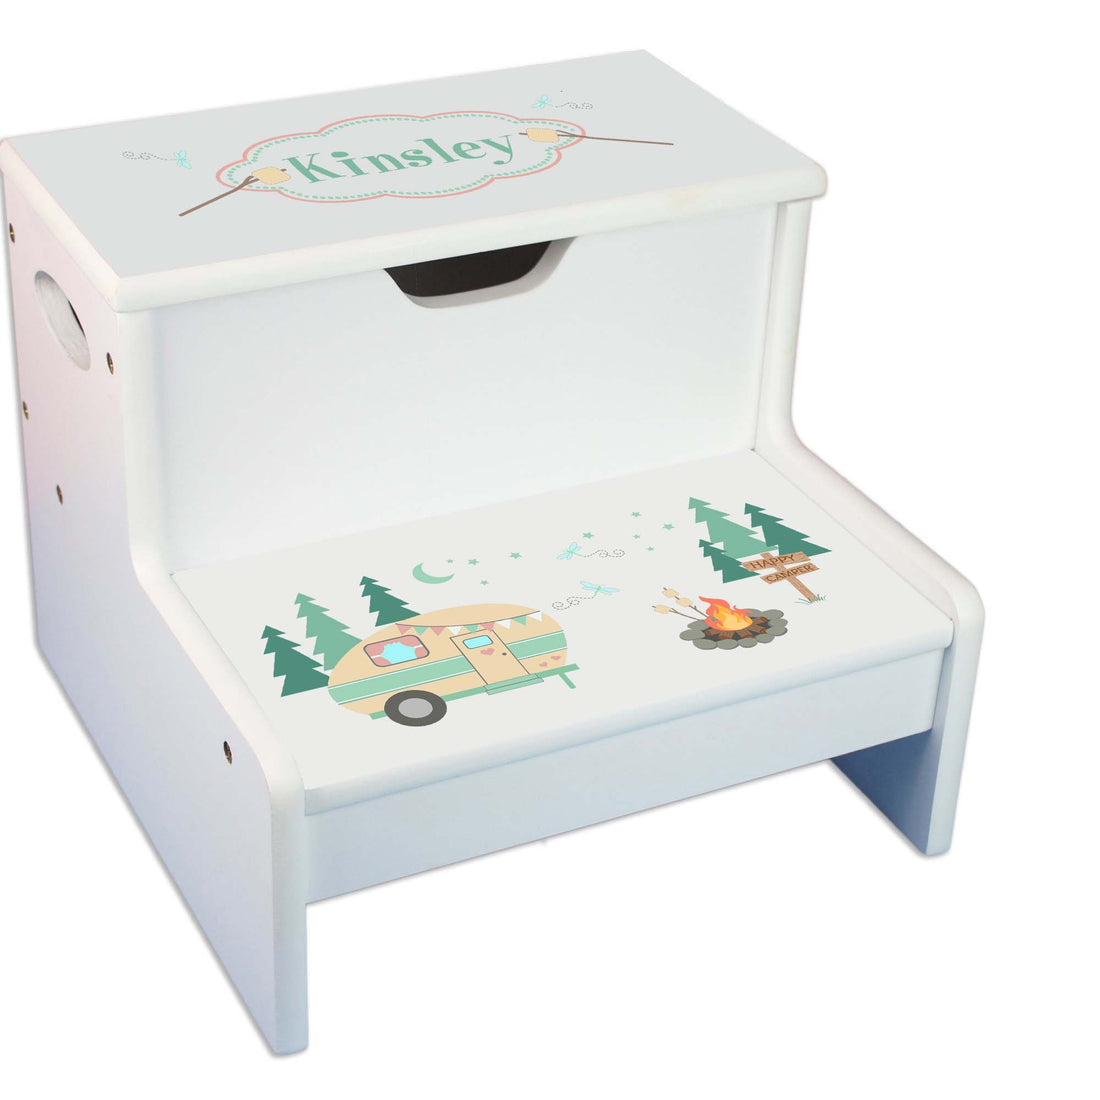 Camp S'mores Personalized White Storage Step Stool